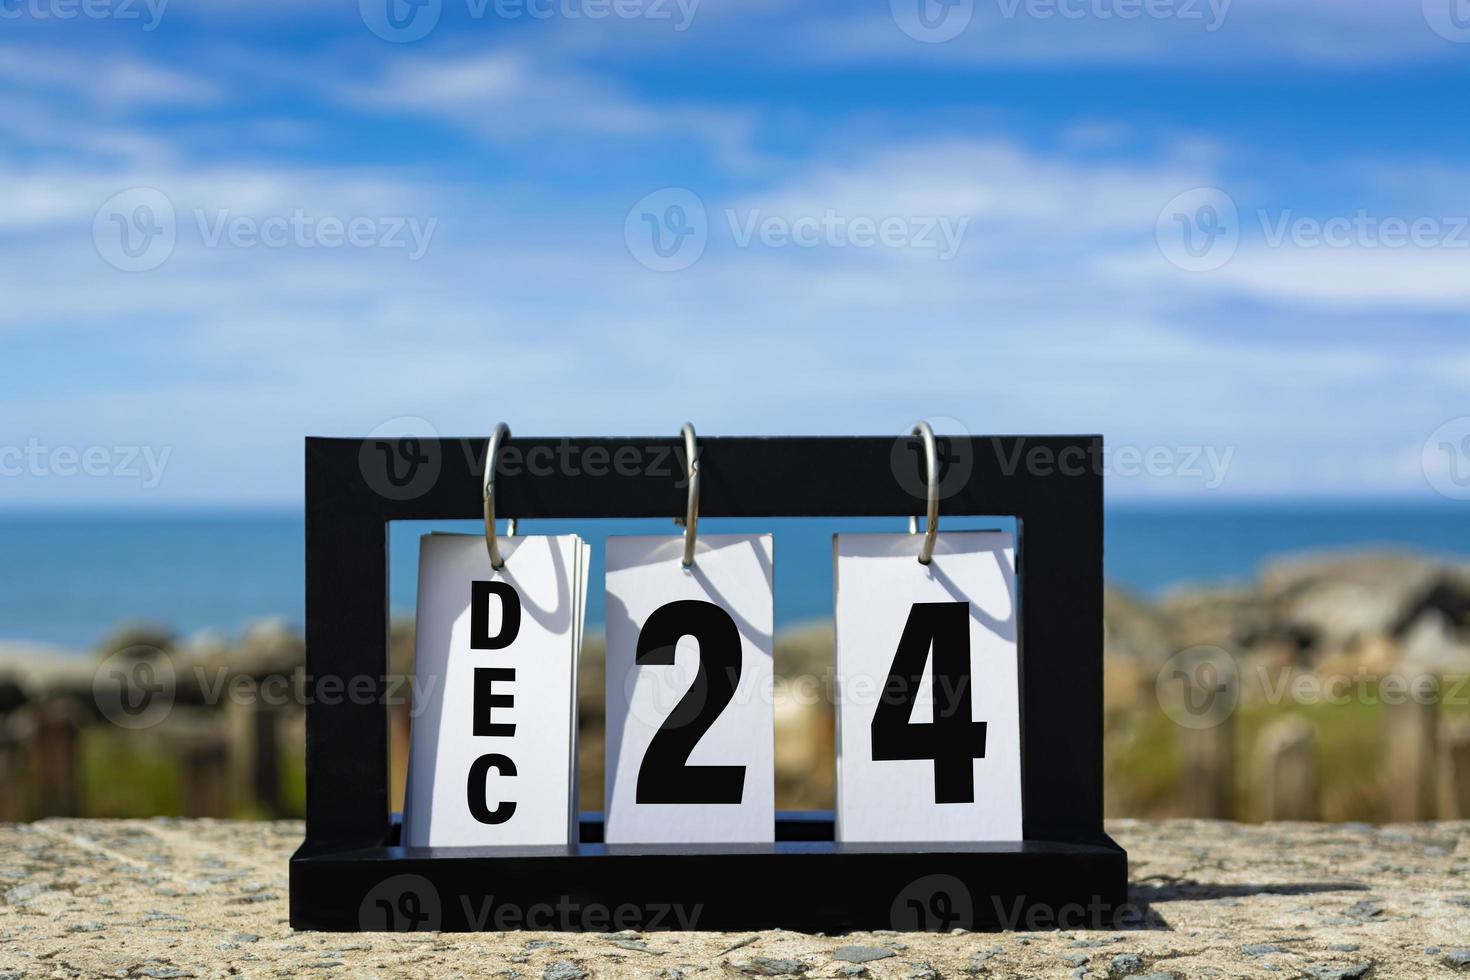 Dec 24 calendar date text on wooden frame with blurred background of ocean. photo